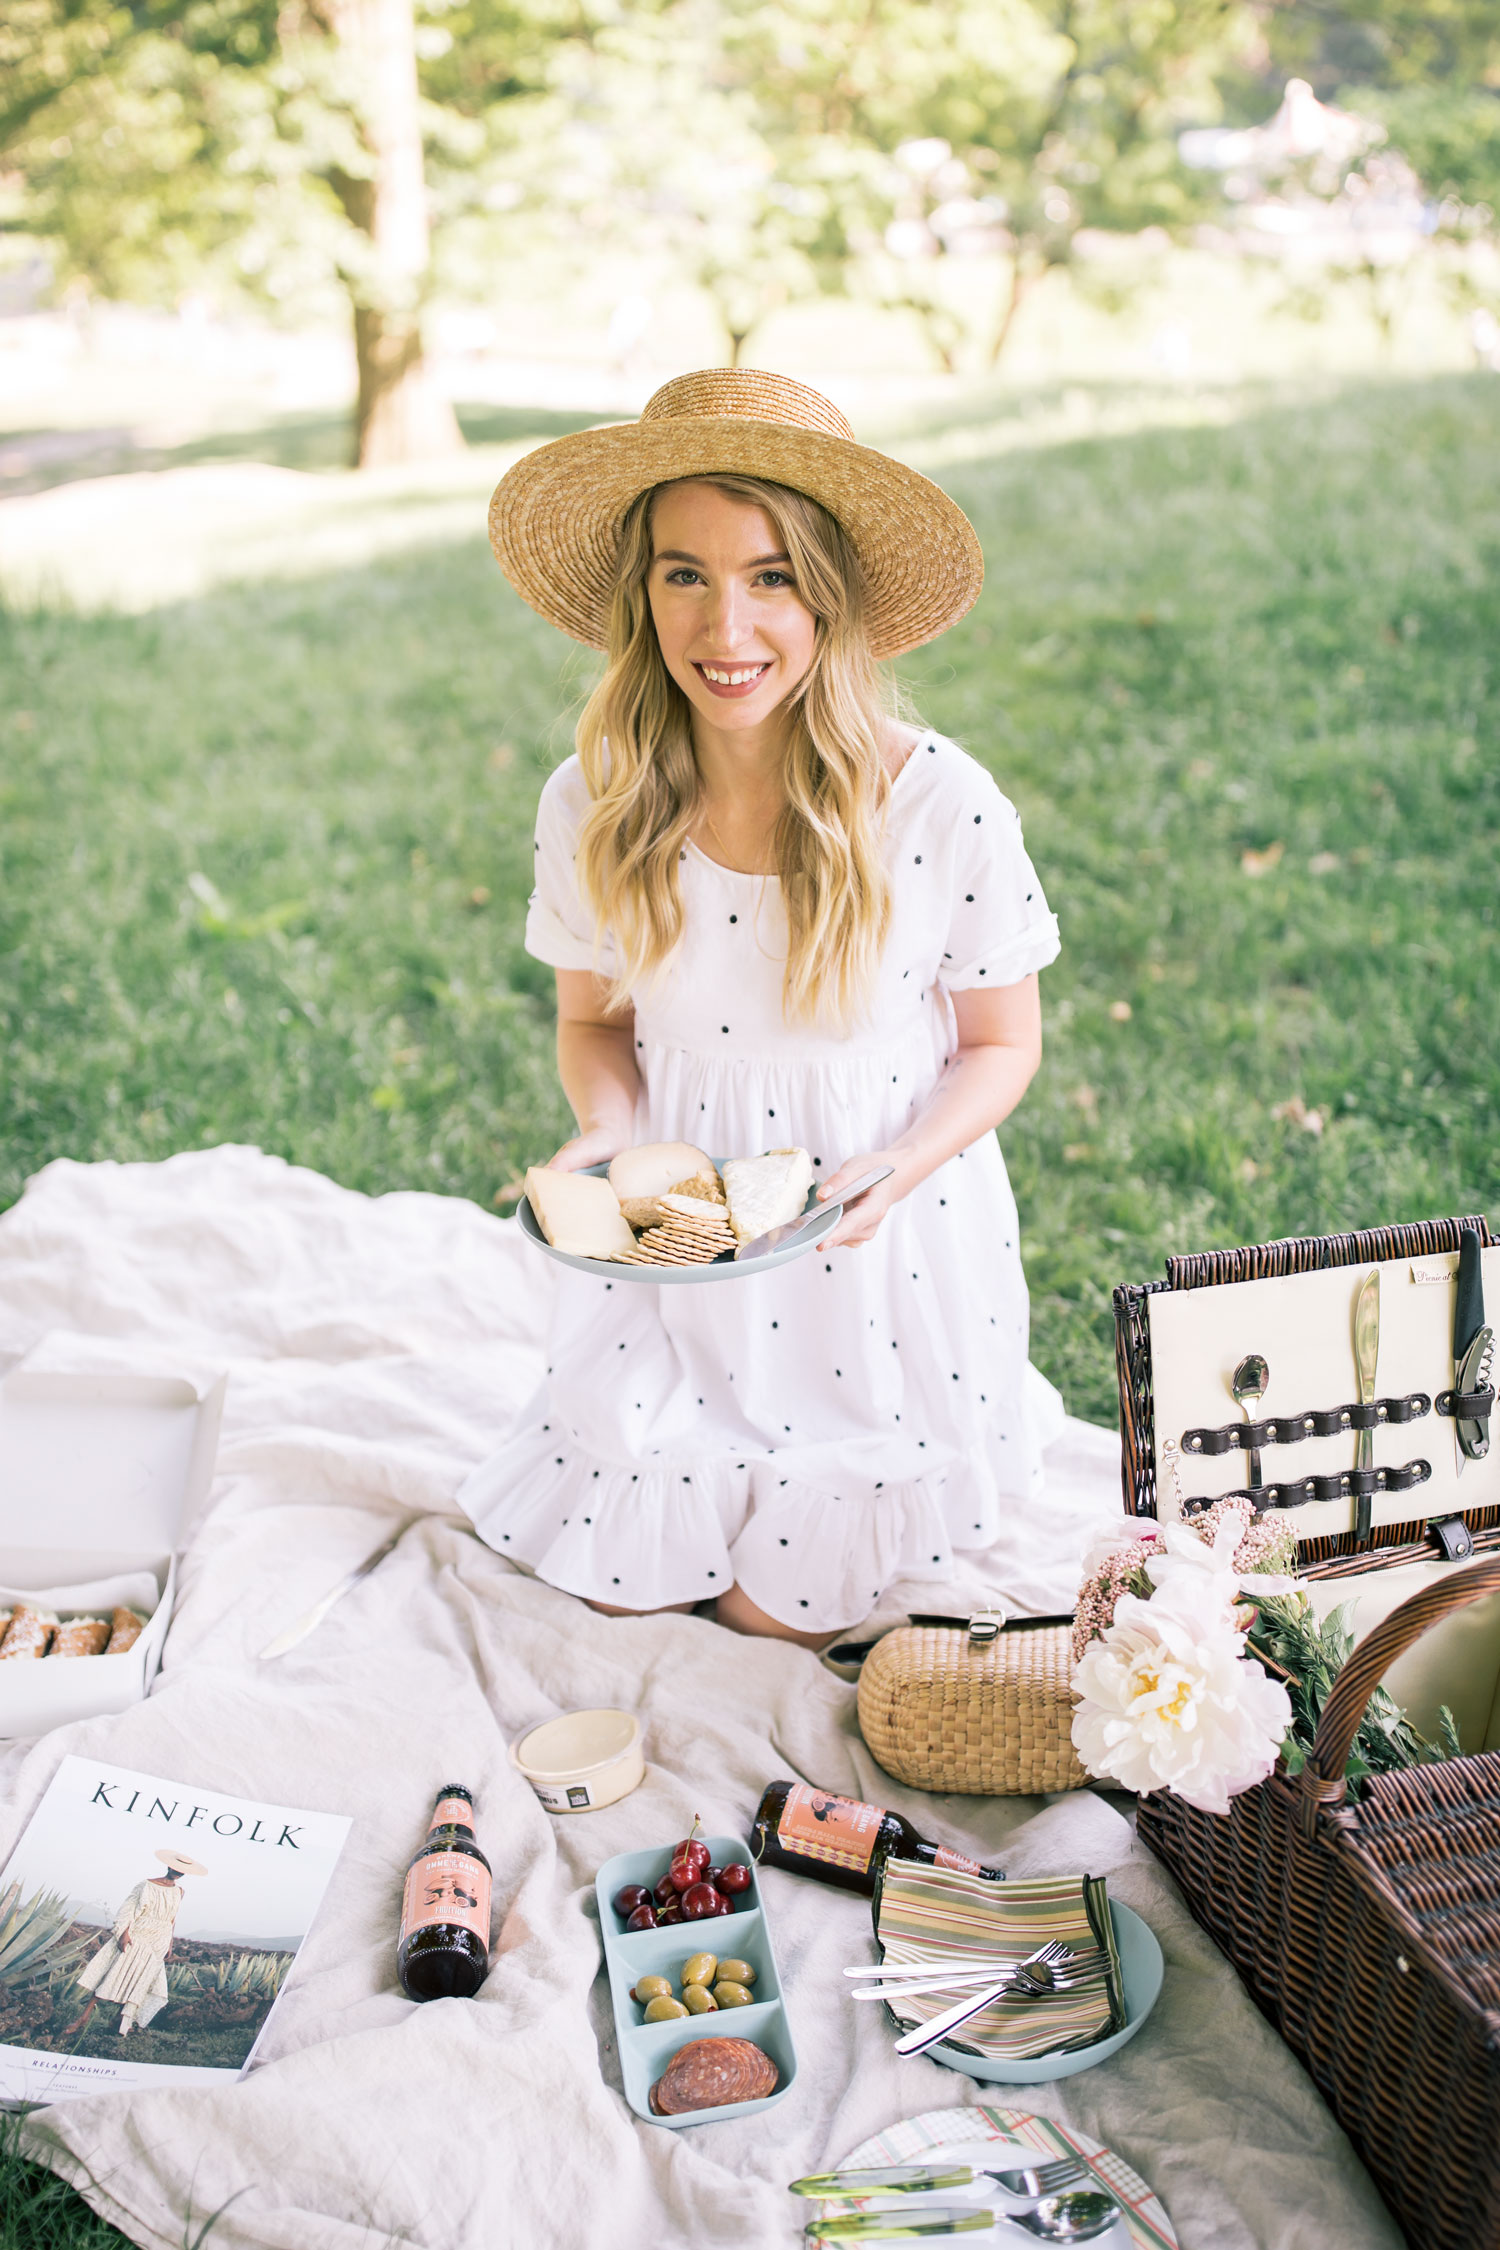 Picnic In Central Park | The Blondielocks | Life + Style